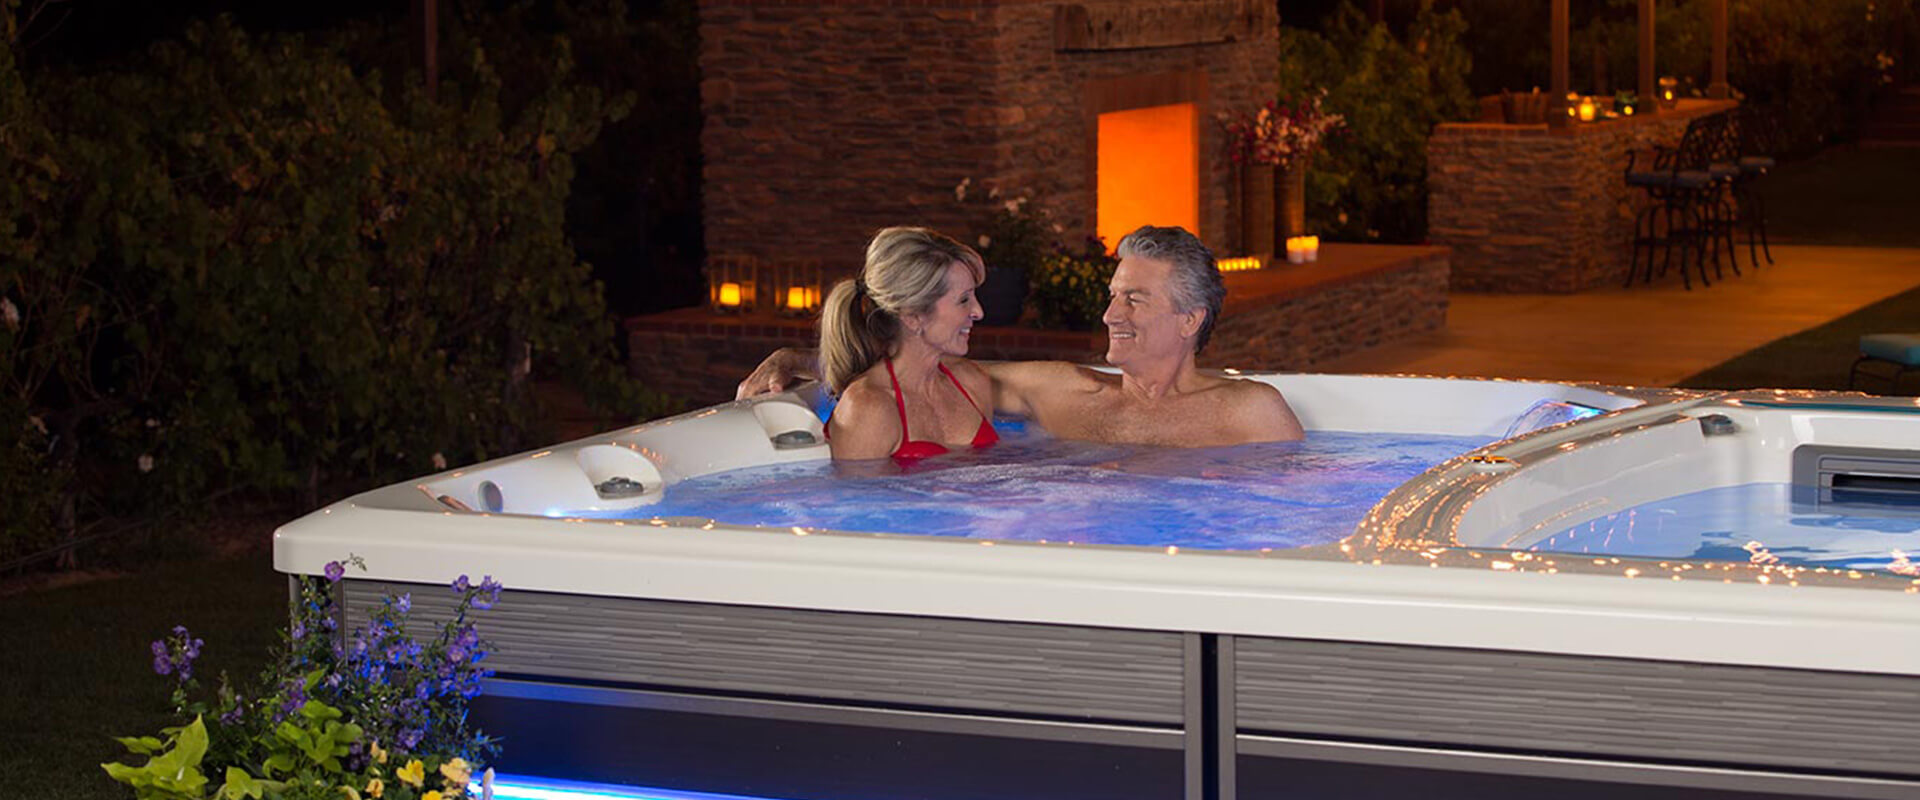 1920x800 Endless Pools E2000 Couple Hot Tubs By Hot Spring